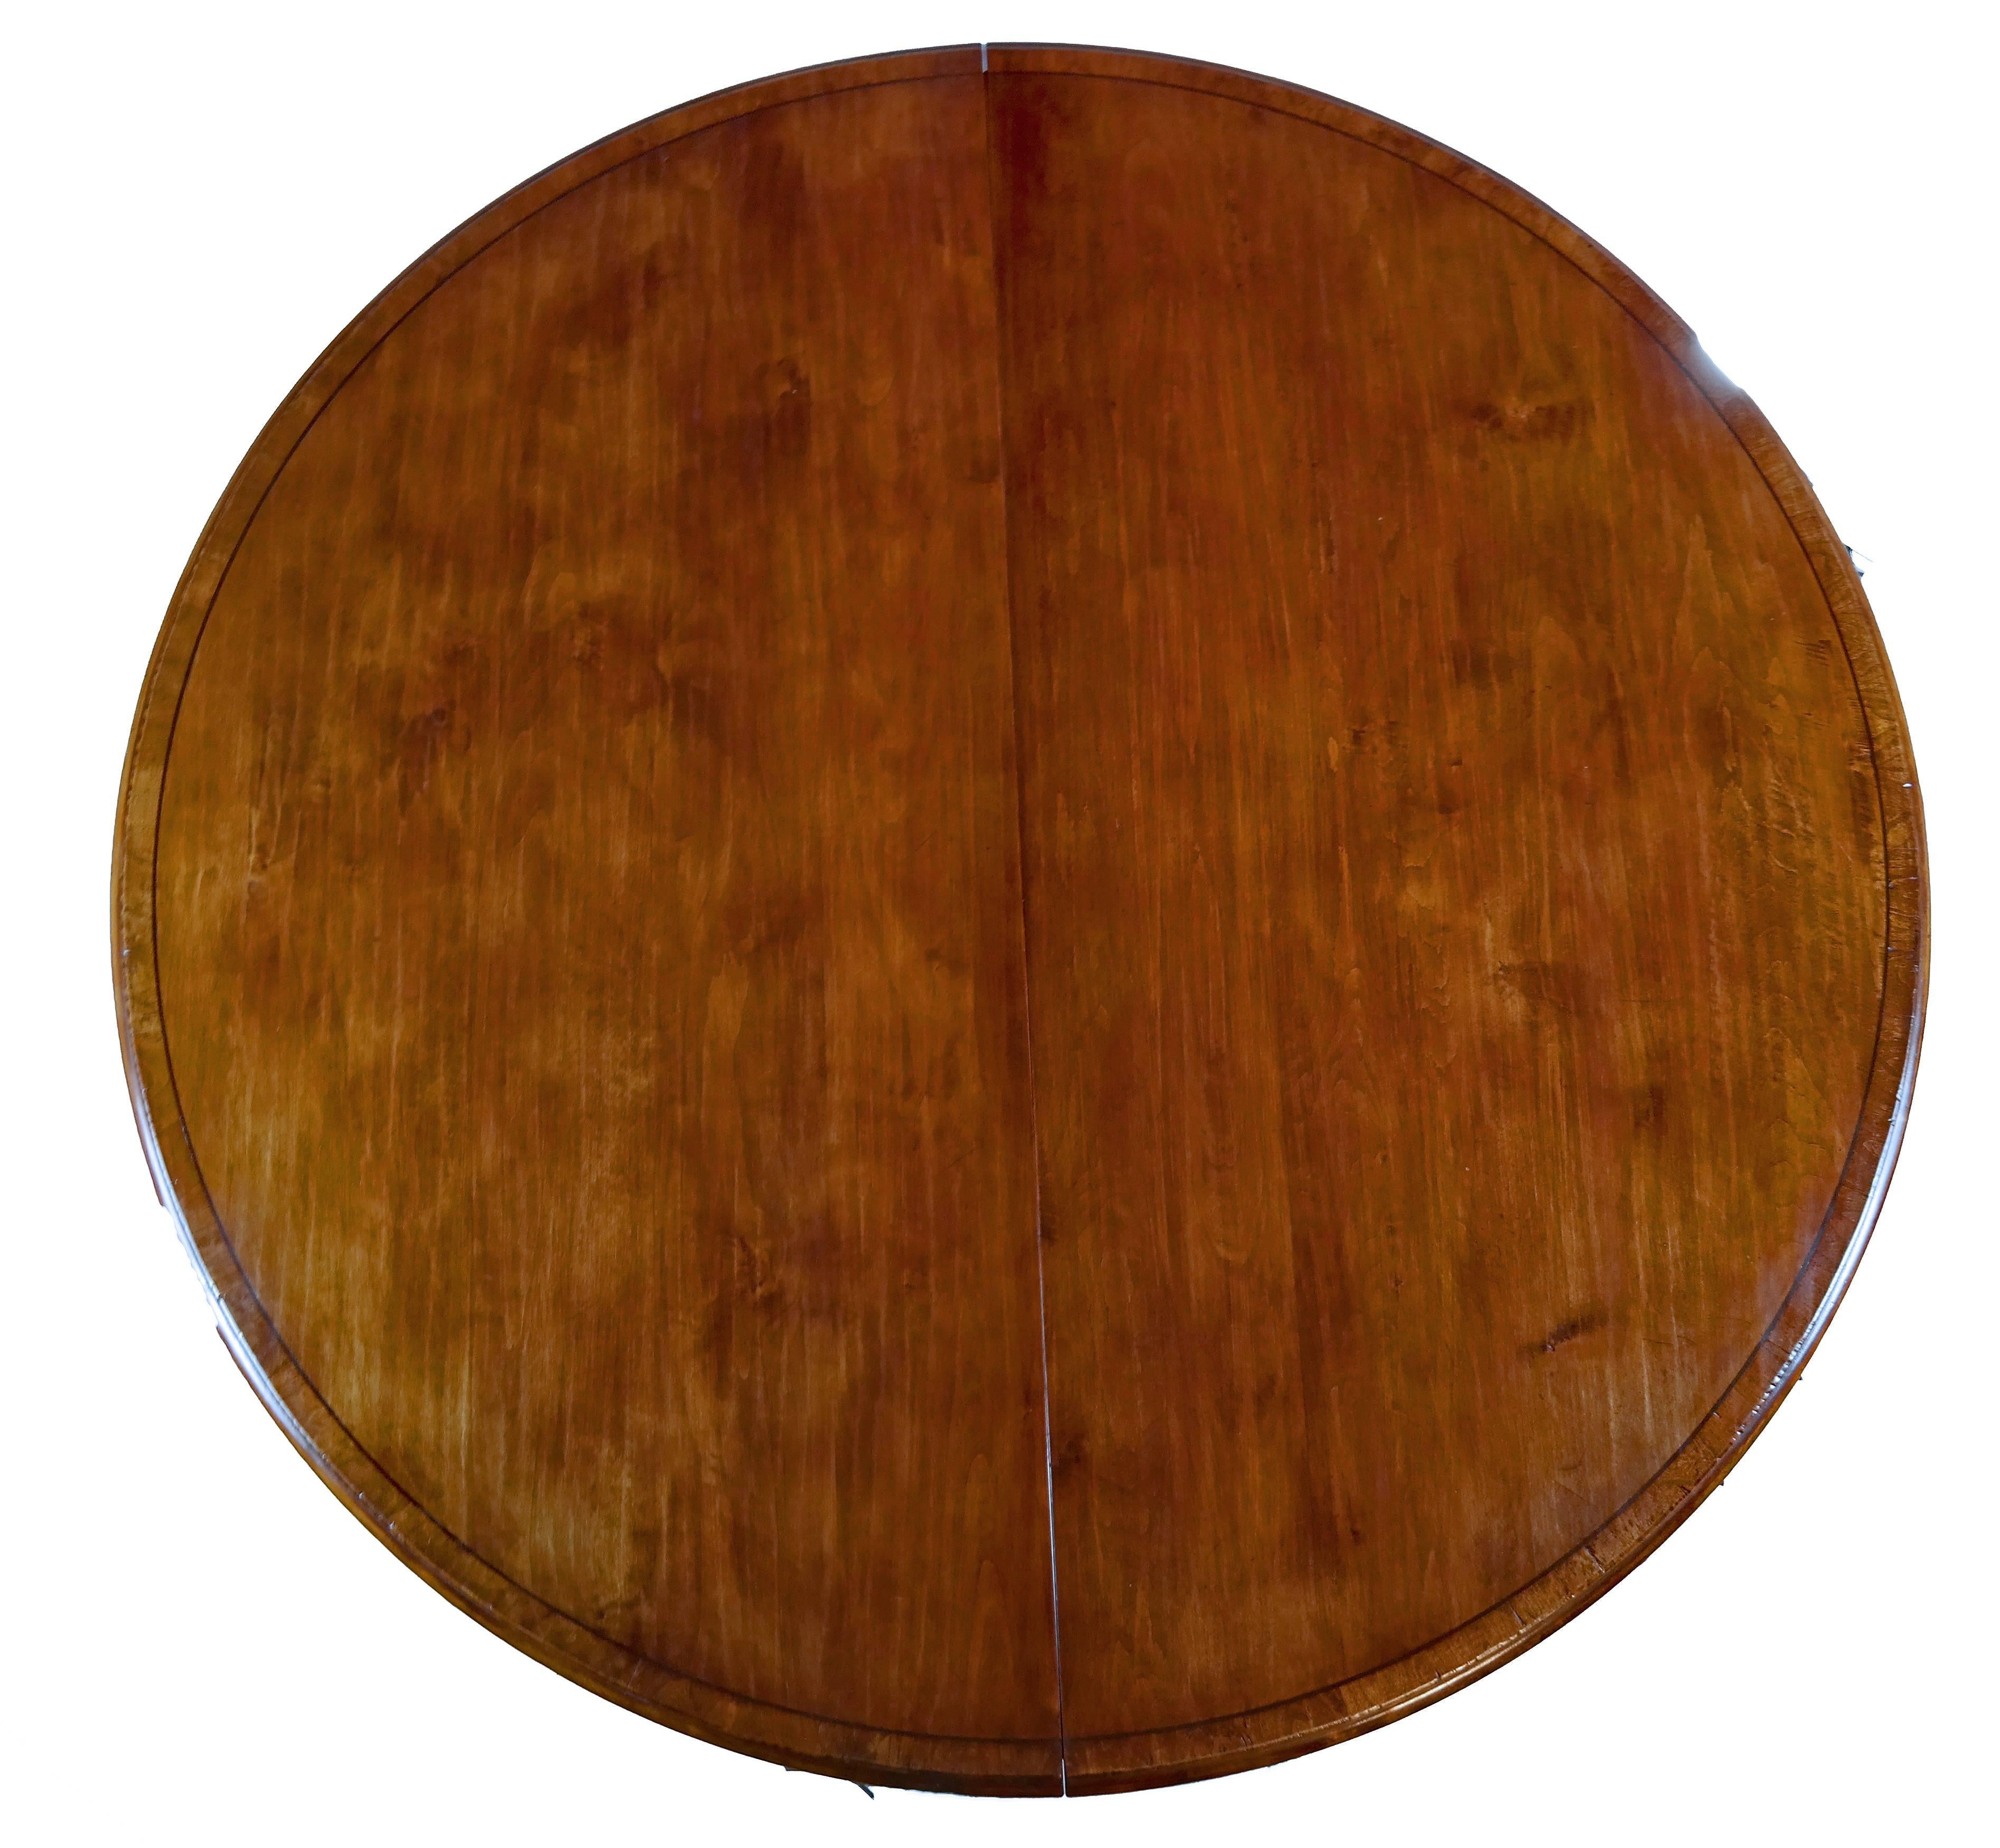 Great Britain (UK) Round Cherry Yewwood-Banded Dining Table